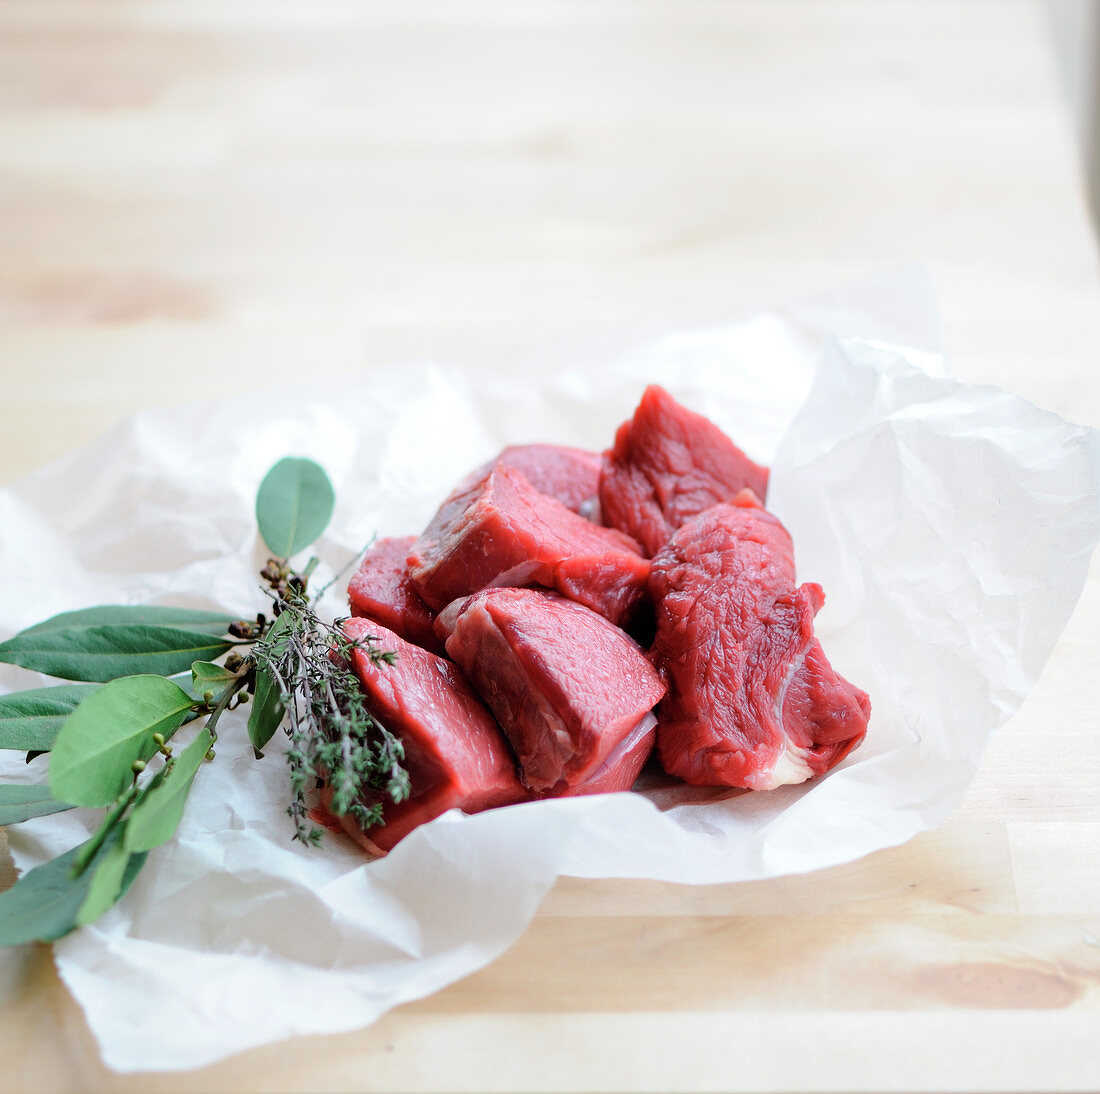 Pieces of raw beef and a bouquet garni